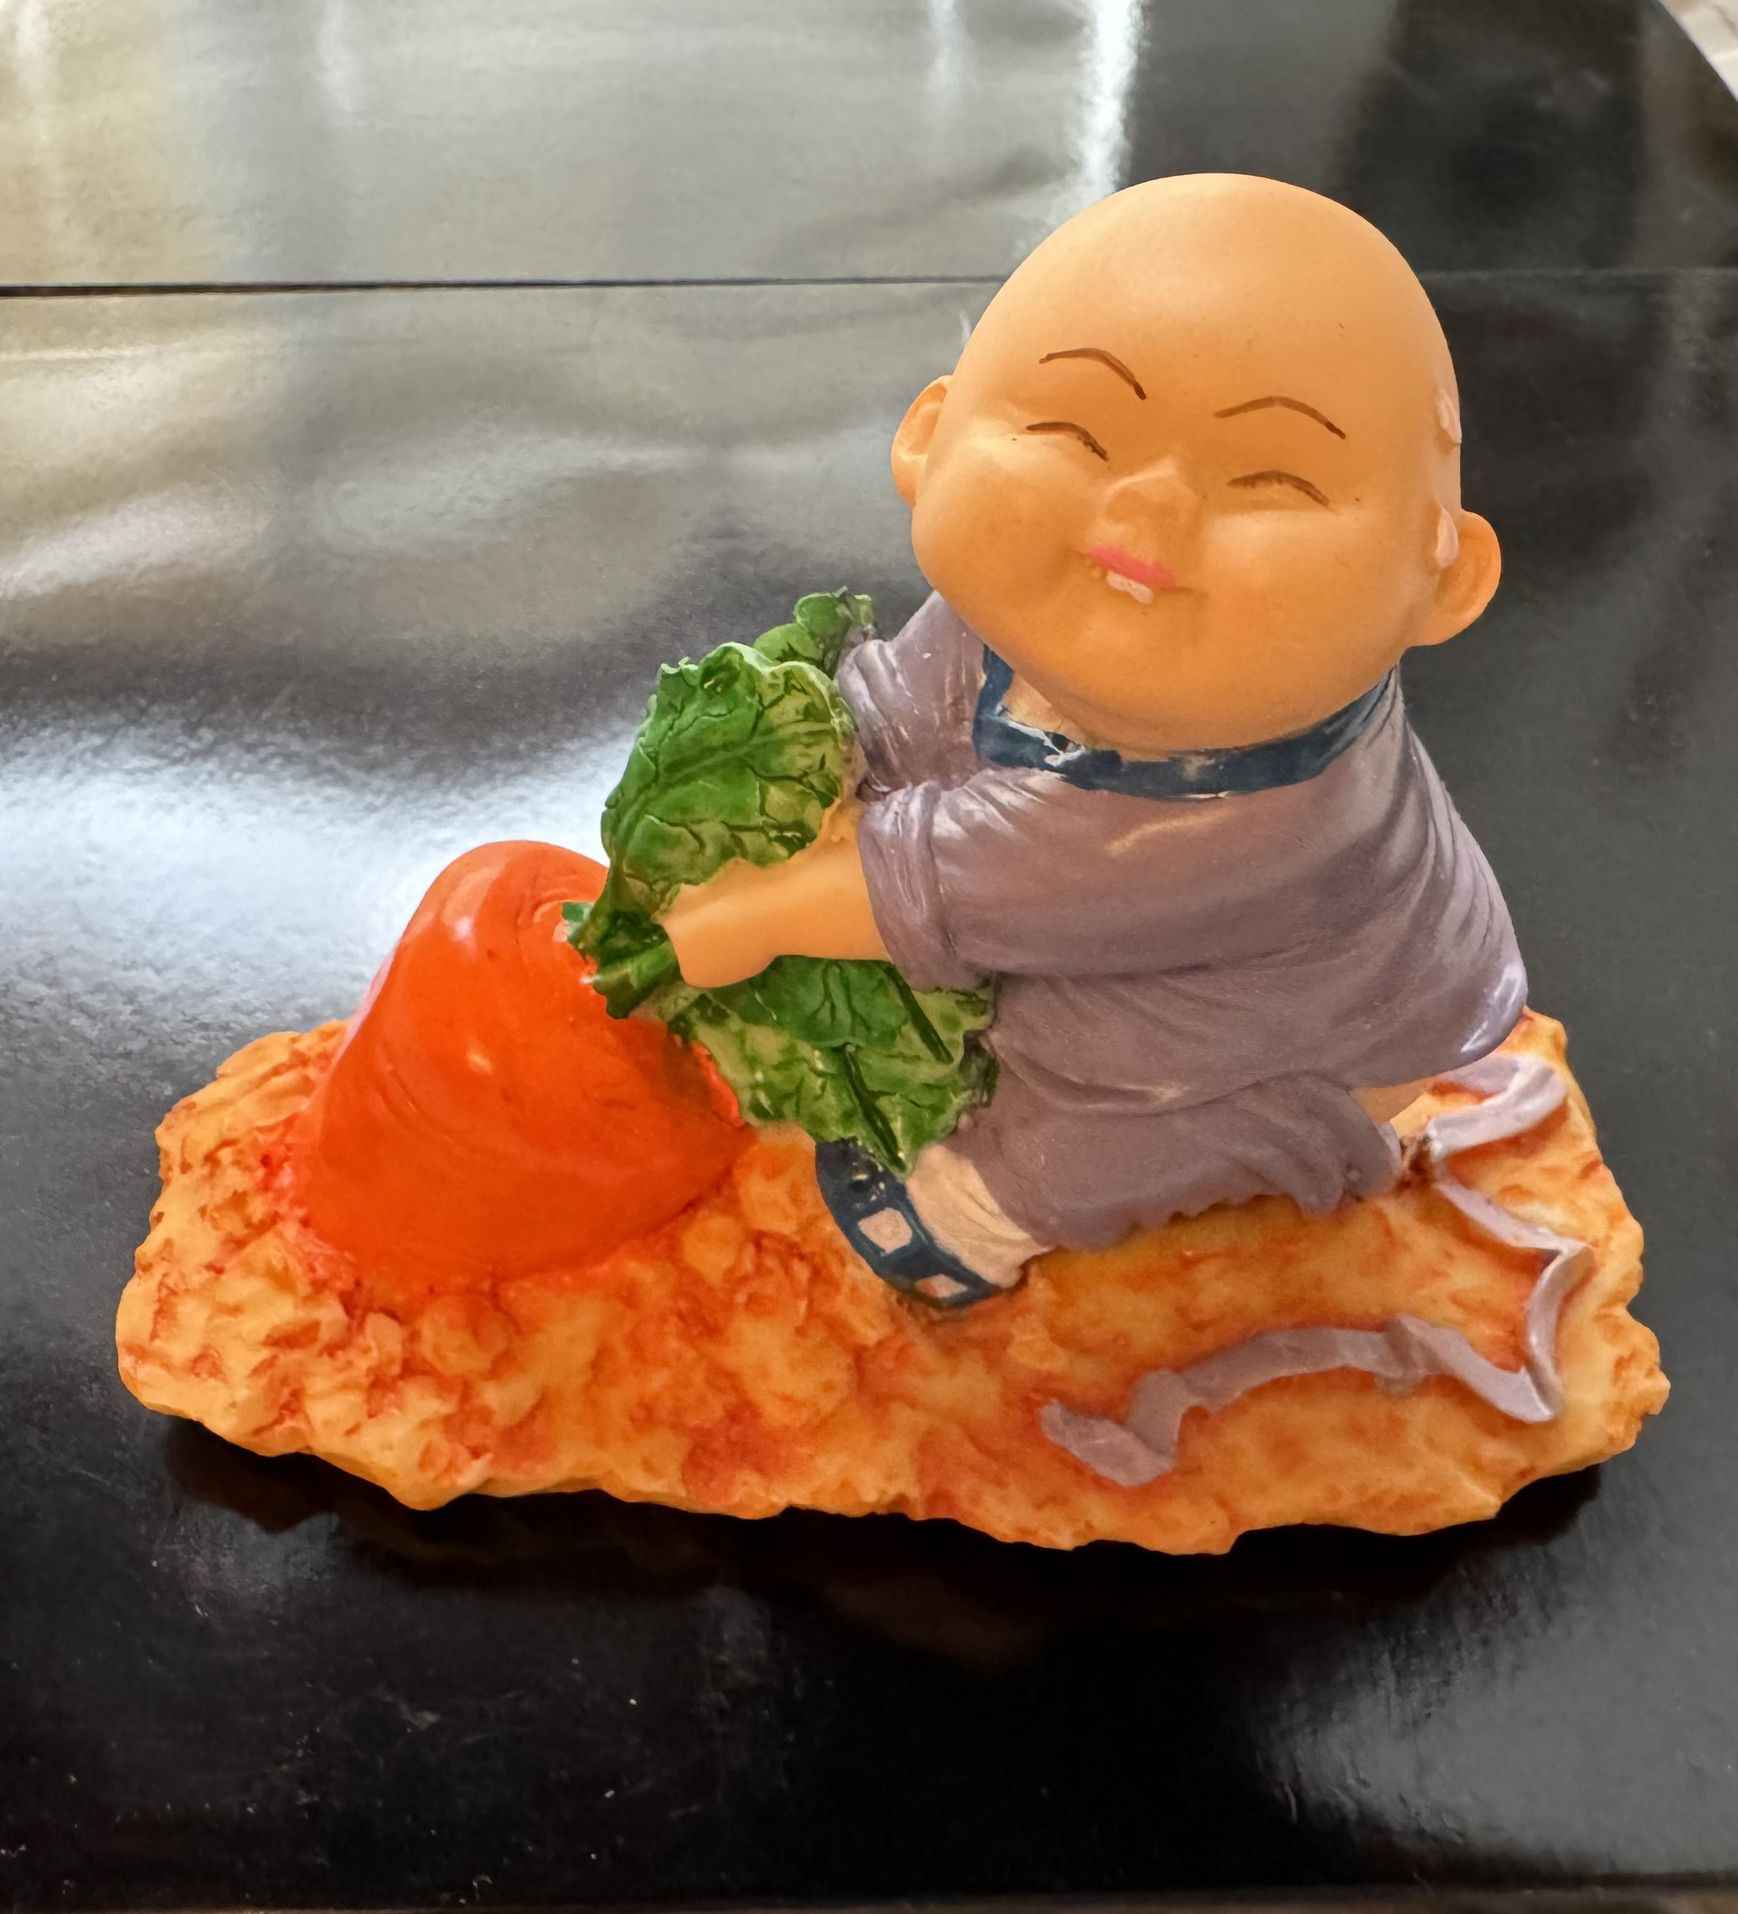 Brand New Buddha Monk Baby Statue Figurine Pulling Carrot Pants Down 4” - 6 “inches $6 Each !!!ACCEPTING OFFERS!!!